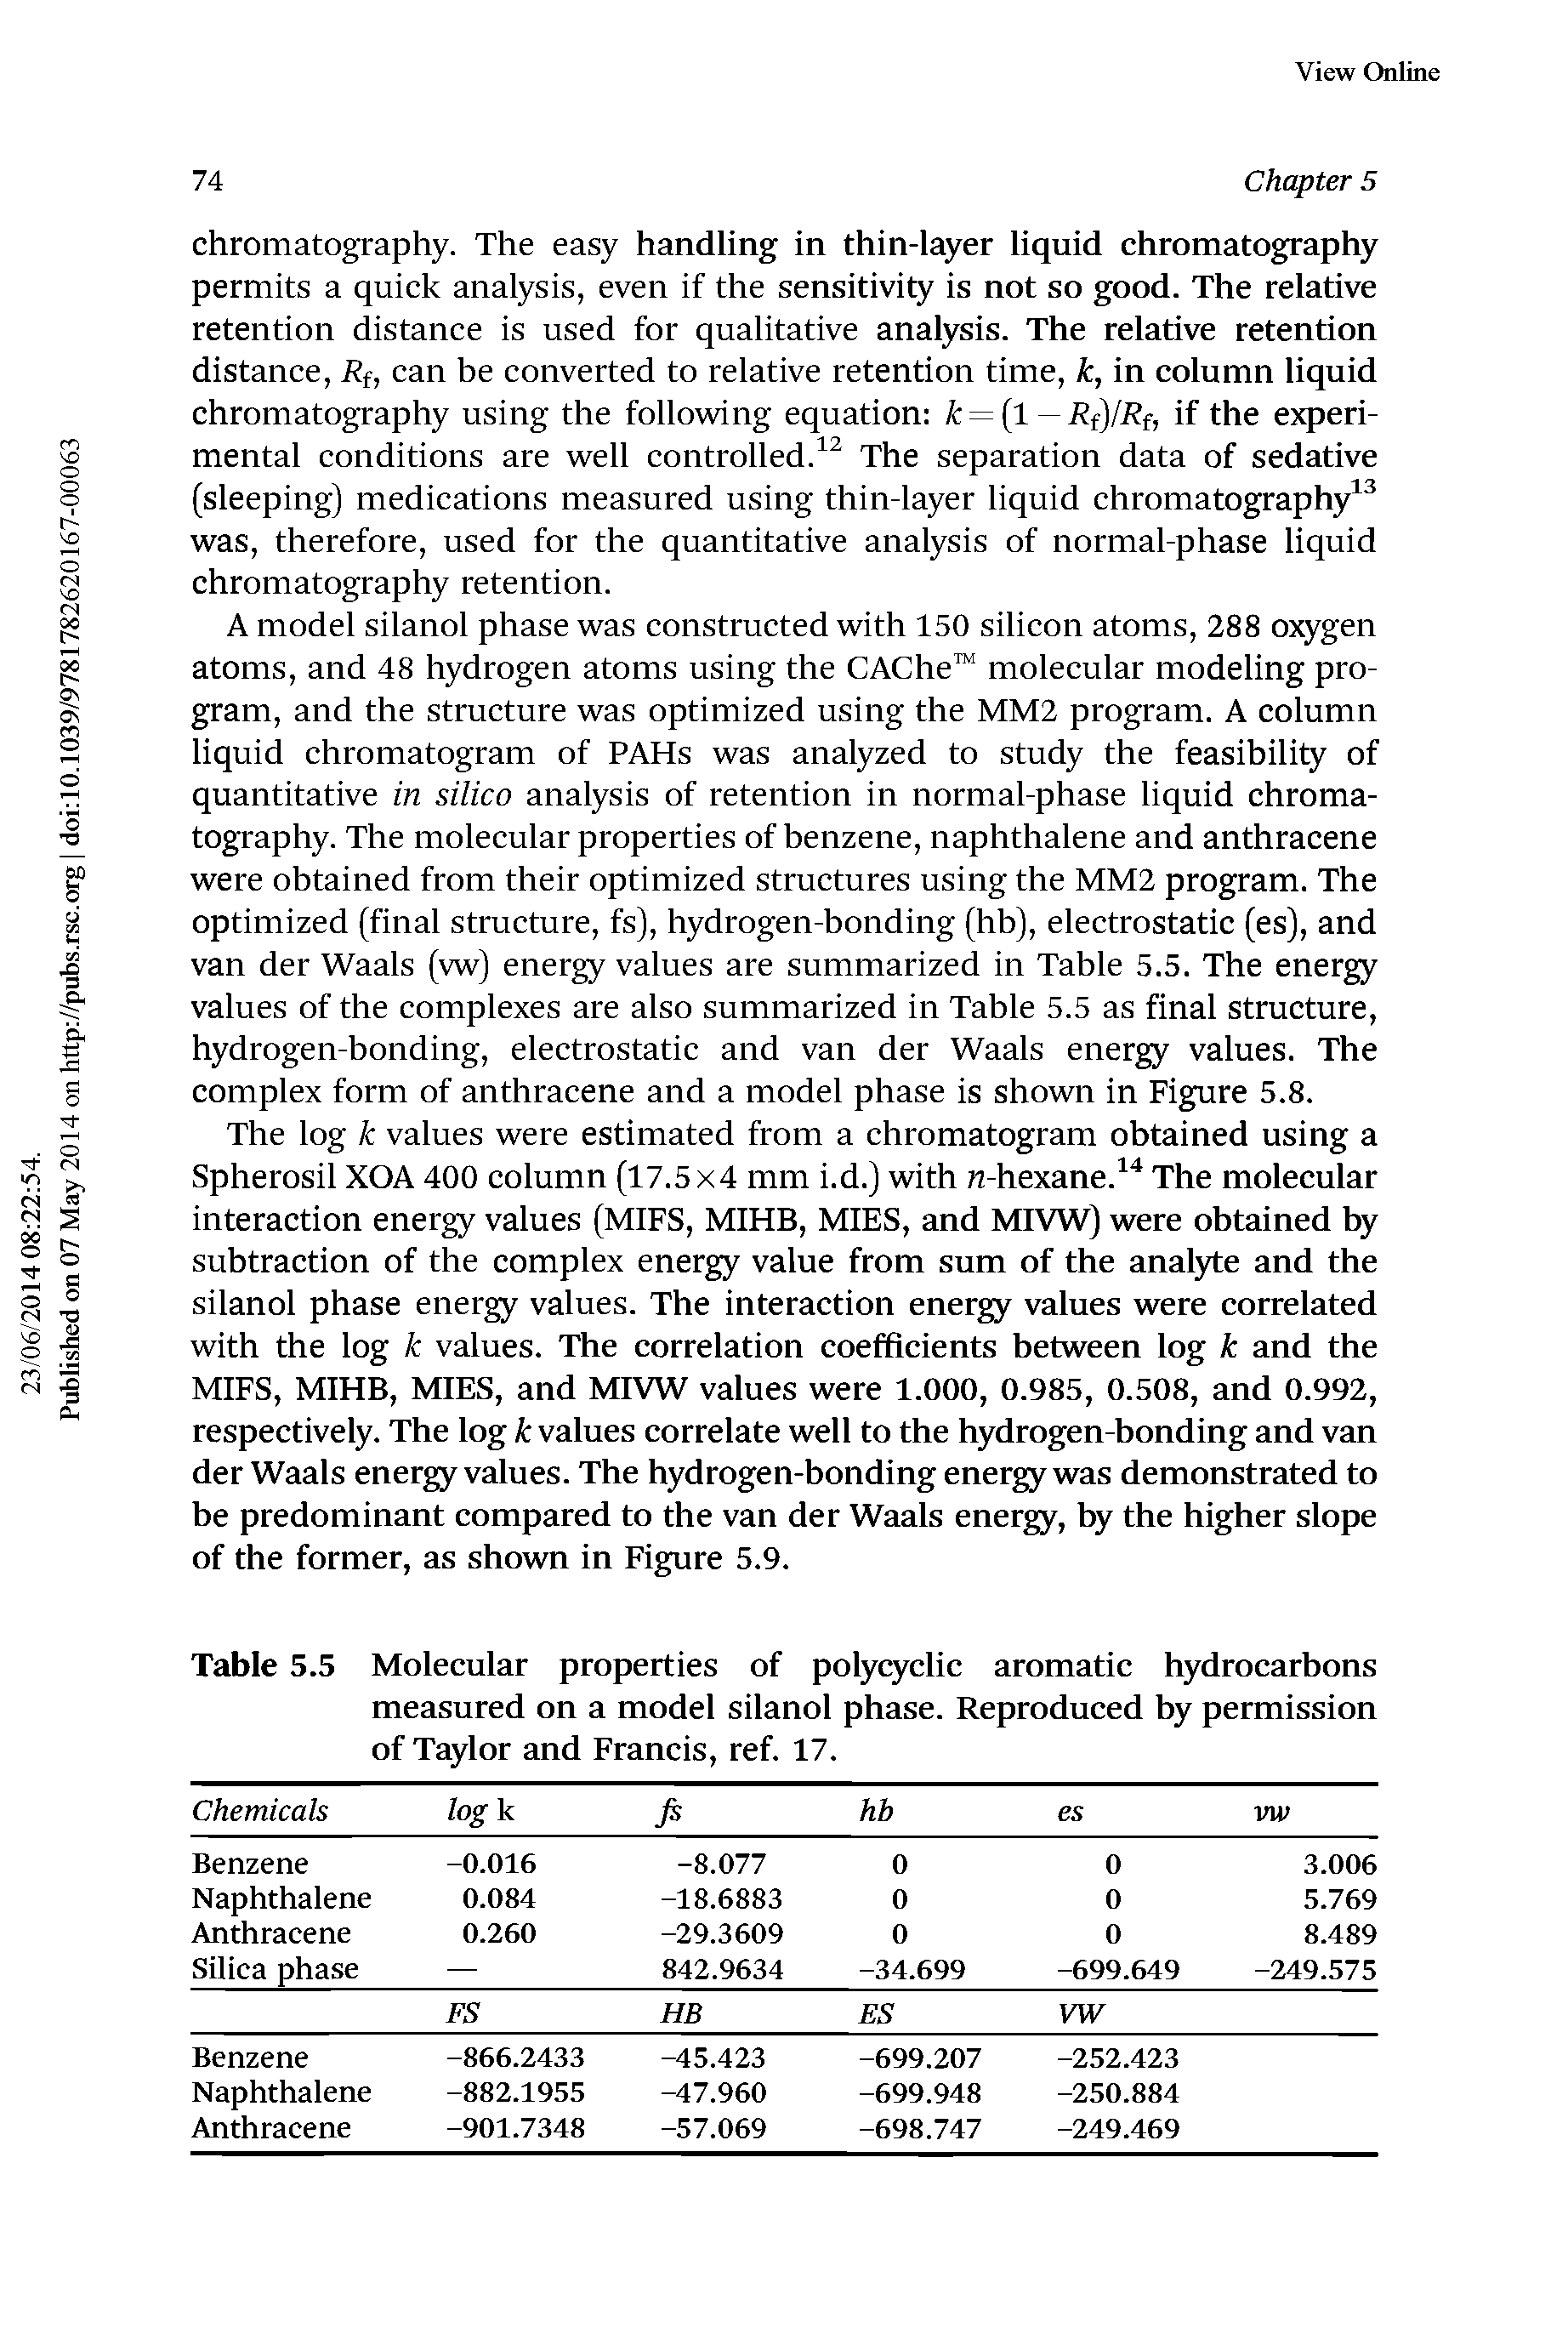 Table 5.5 Molecular properties of polycyclic aromatic hydrocarbons measured on a model silanol phase. Reproduced by permission of Taylor and Francis, ref. 17.